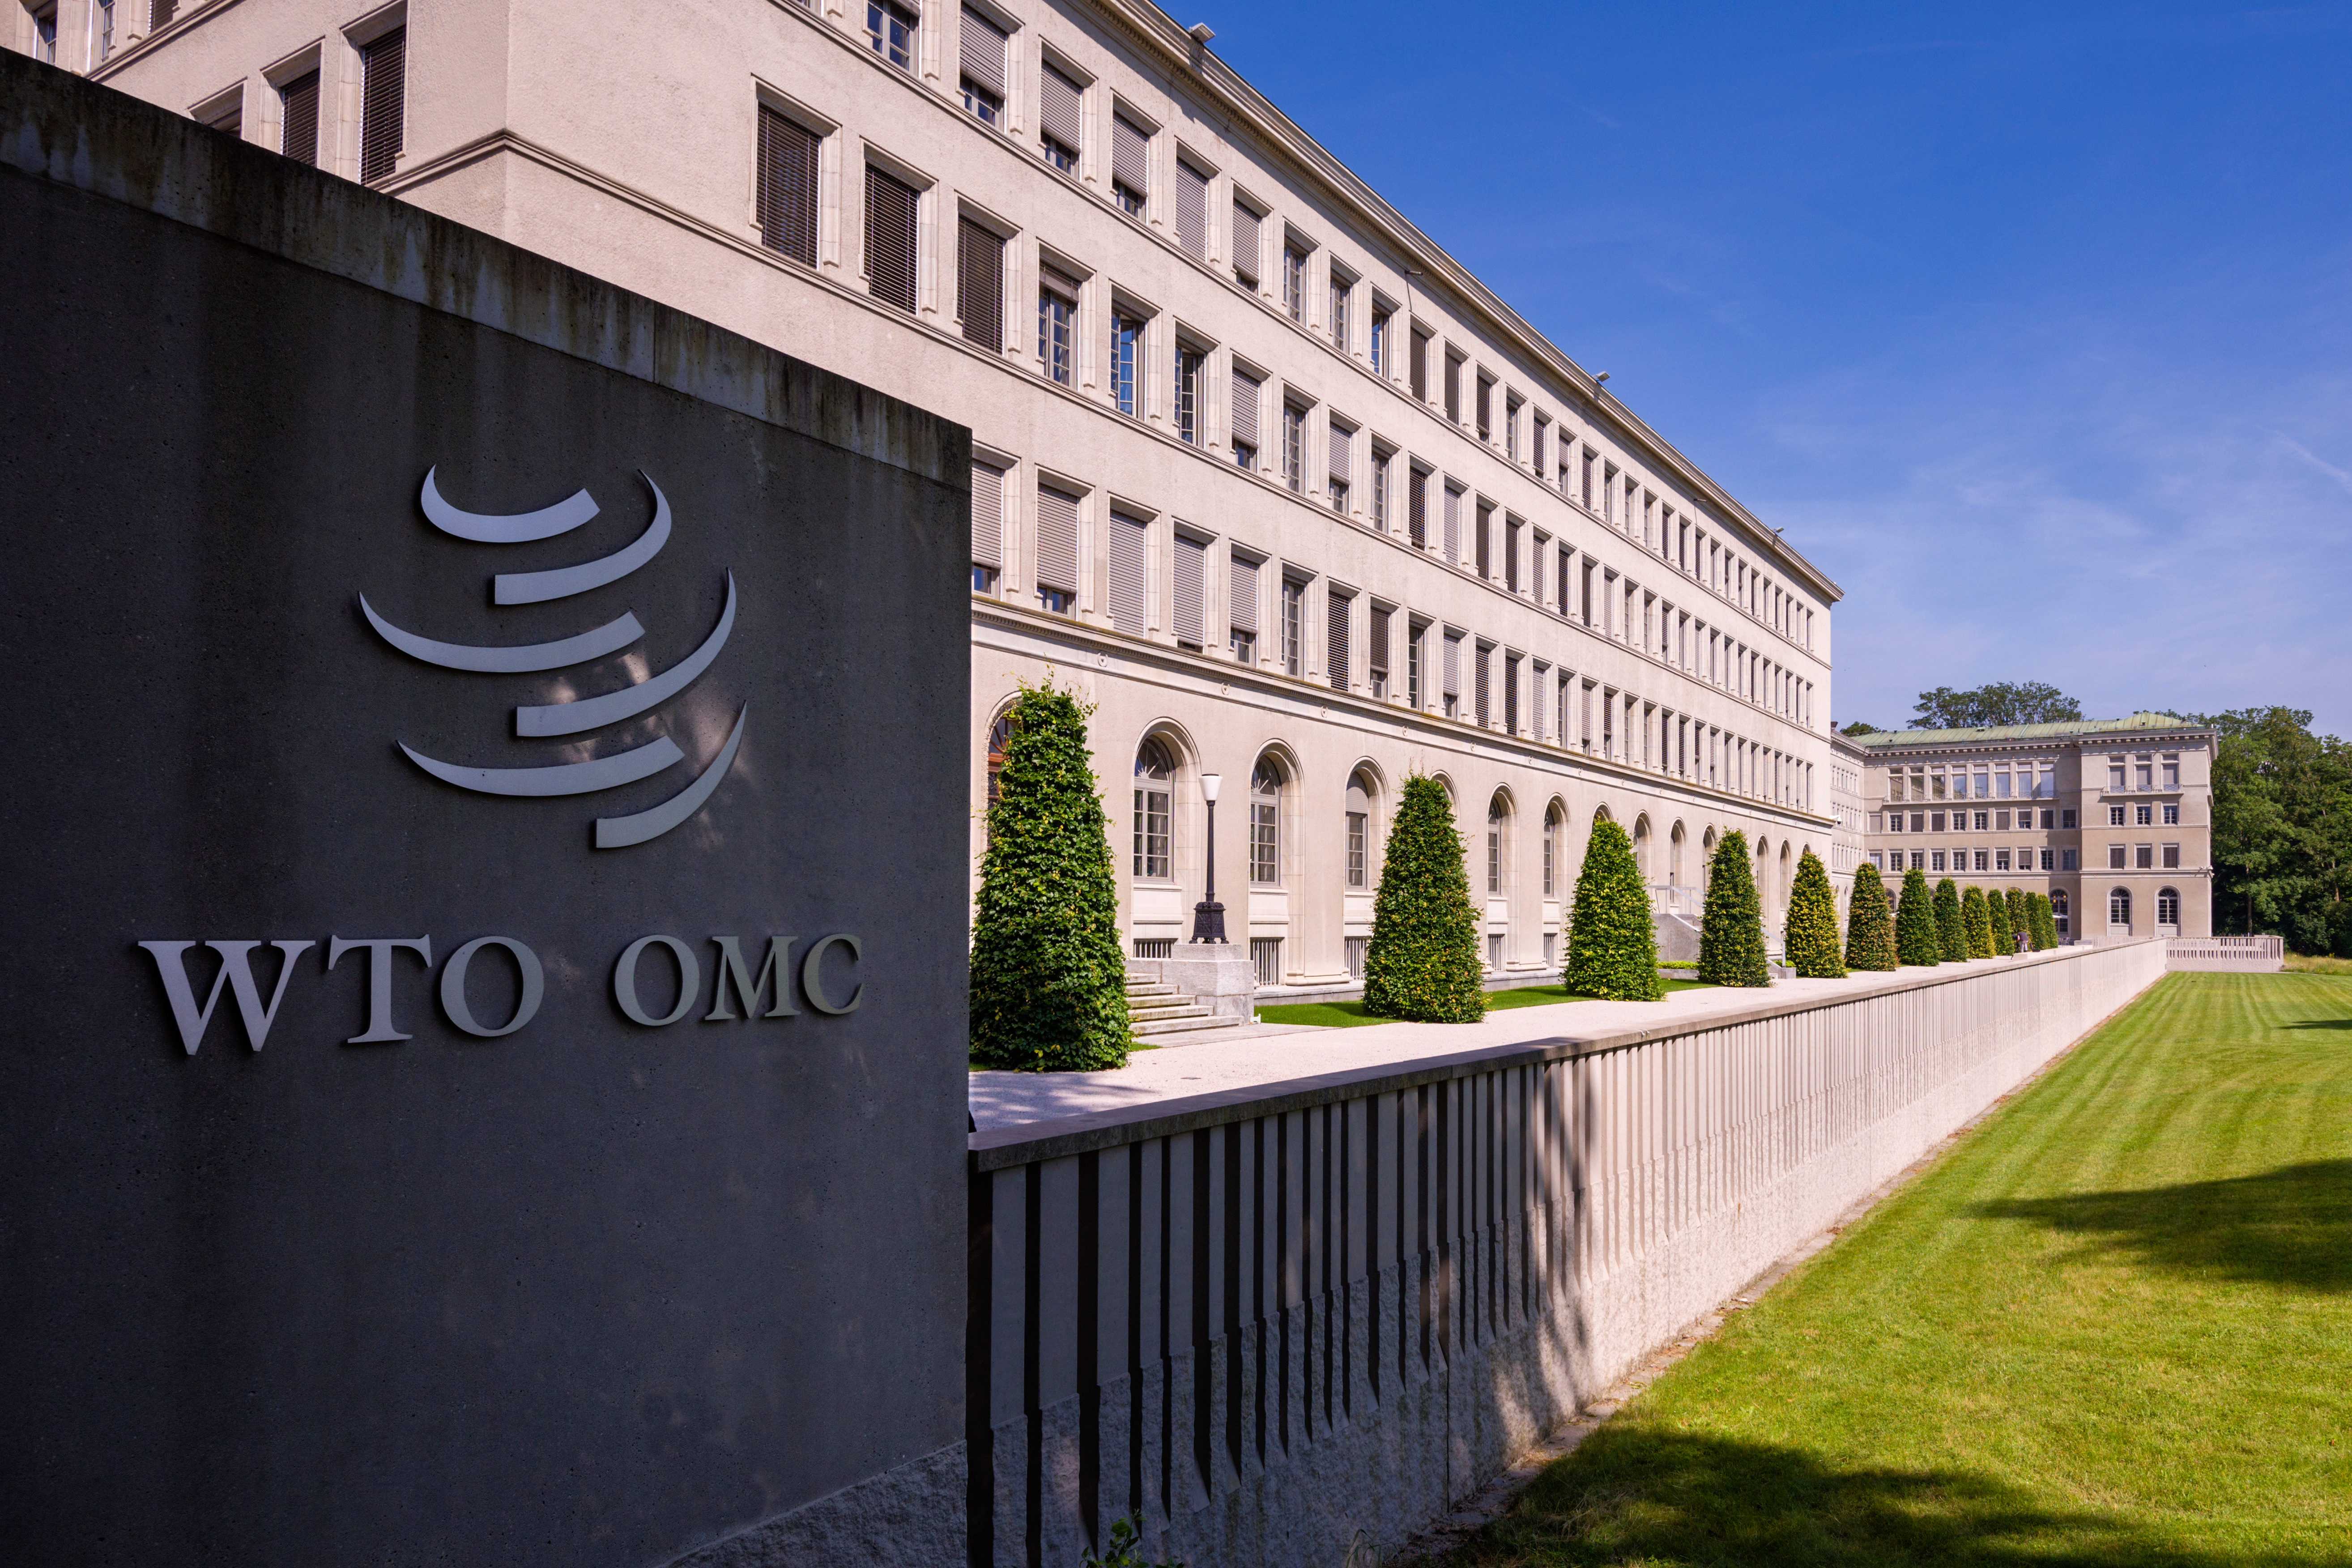 WTO building